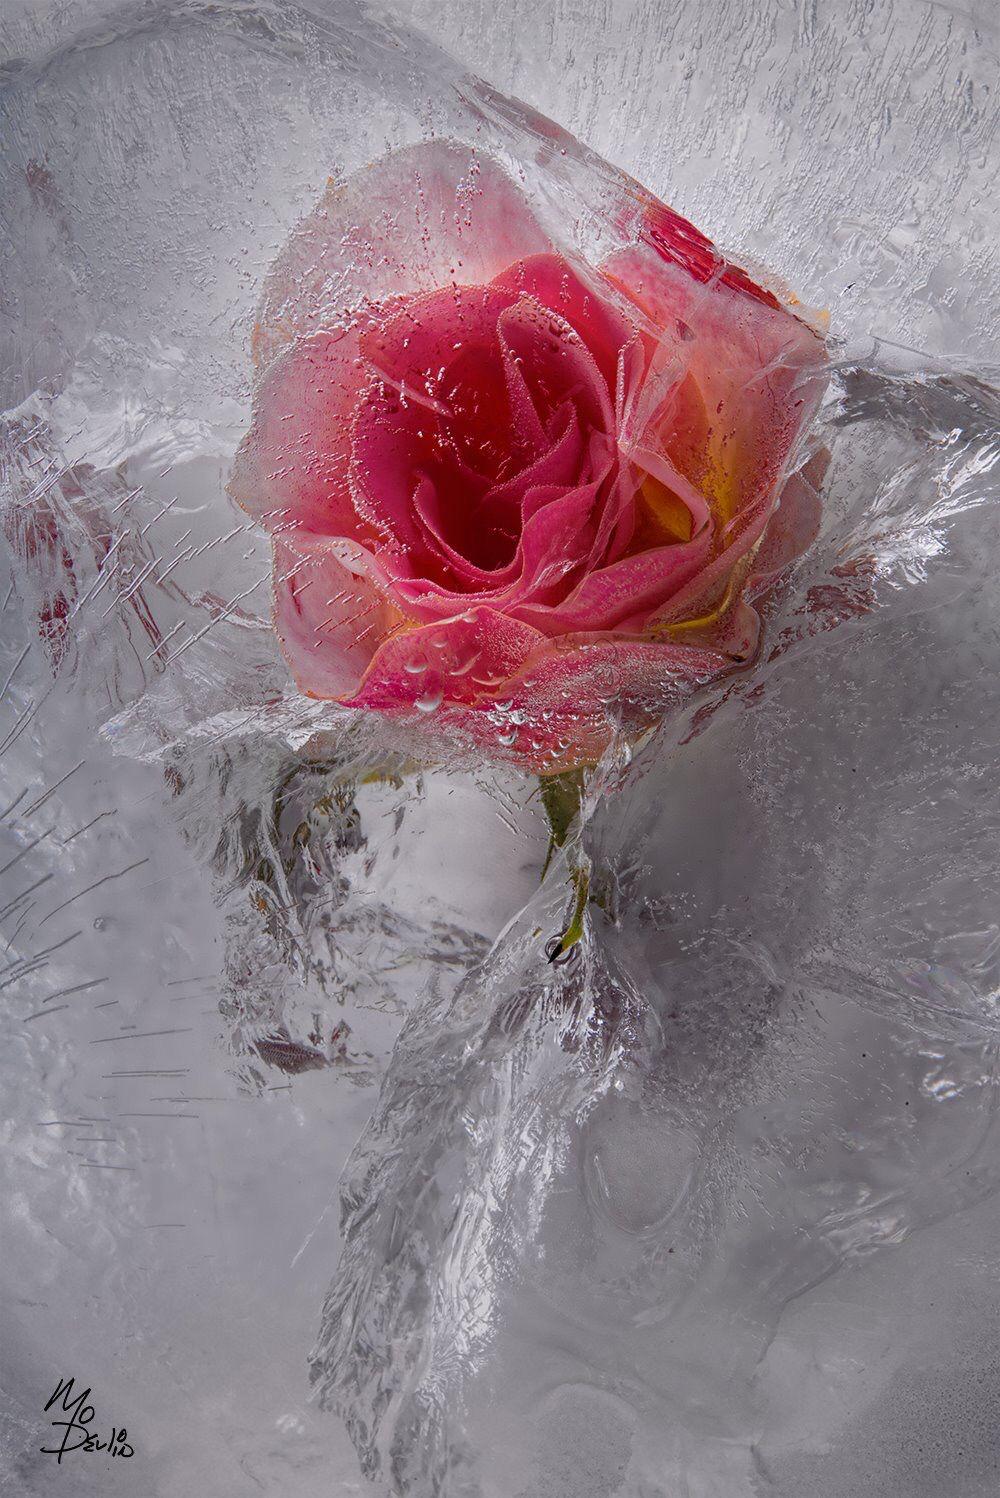 Frozen Flowers Ice Rose. Flowers photography, Flower ice, Flower photo